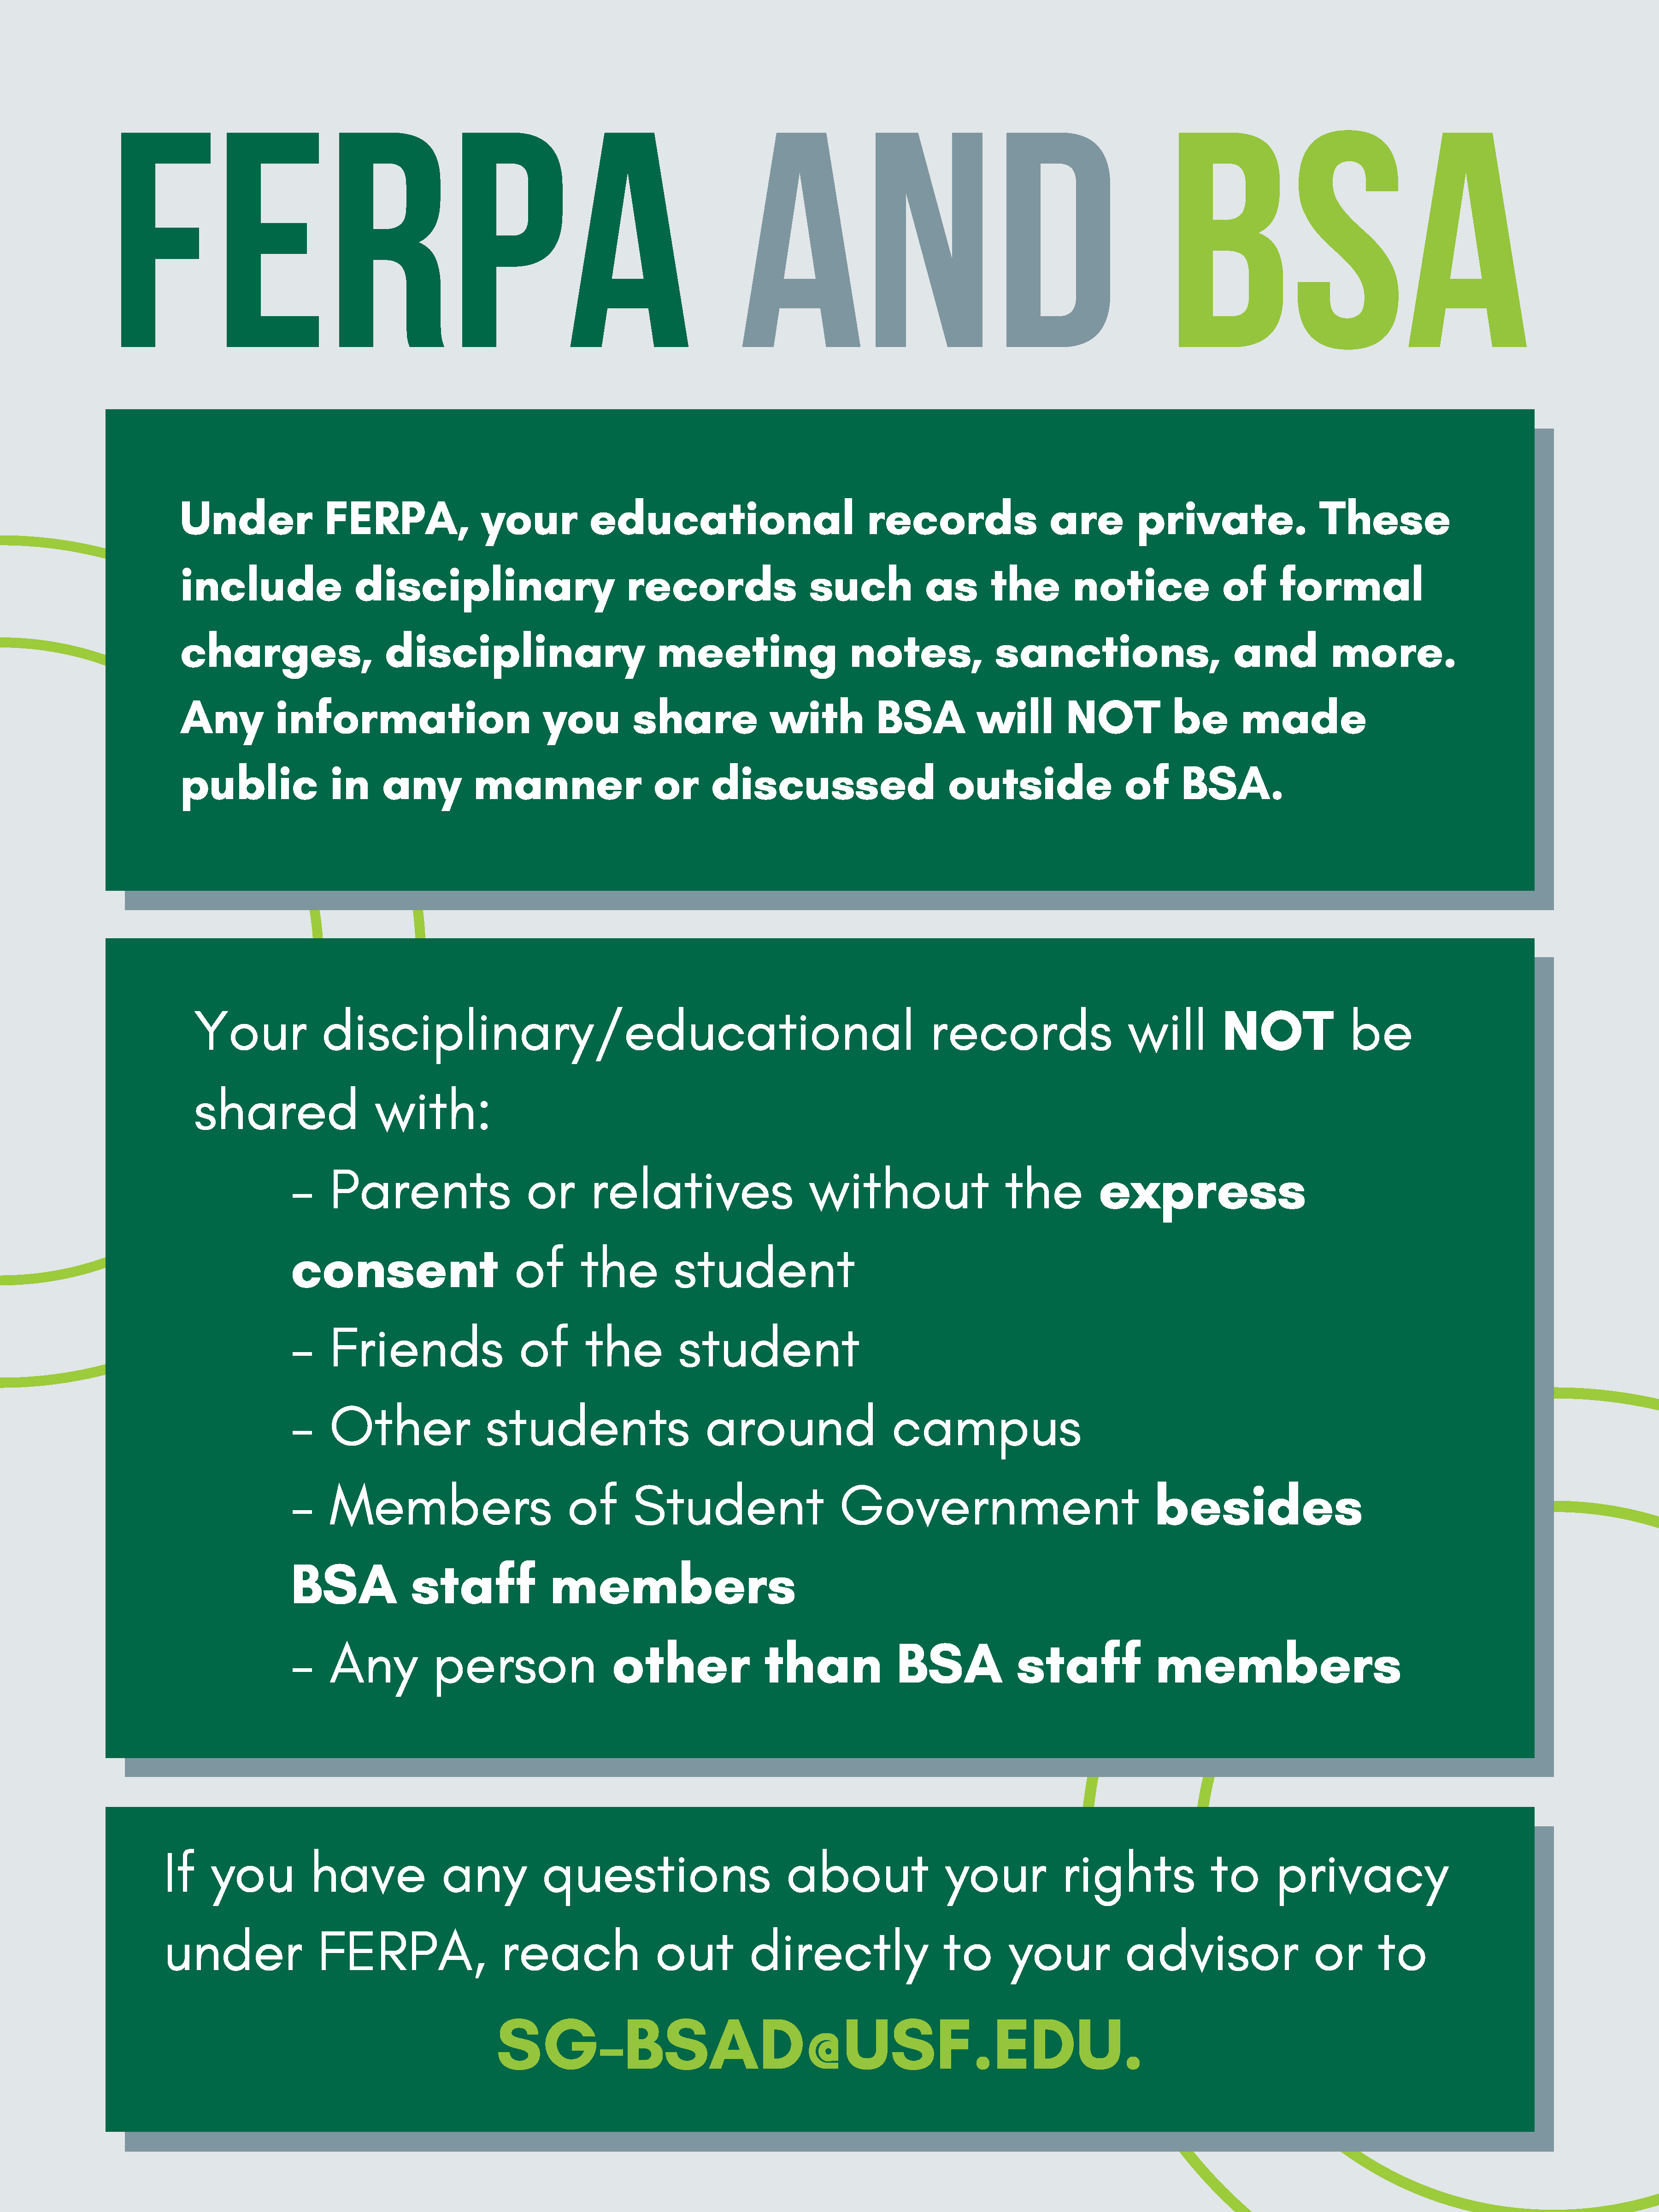 FERPA and BSA. Under FERPA, your educational records are private. Theseinclude disciplinary records such as the notice of formalcharges, disciplinary meeting notes, sanctions, and more.Any information you share with BSA will NOT be madepublic in any manner or discussed outside of BSA. Your disciplinary/educational records will NOT beshared with: - Parents or relatives without the expressconsent of the student - Friends of the student - Other students around campus - Members of Student Government besidesBSA staff members - Any person other than BSA staff members. If you have any questions about your rights to privacyunder FERPA, reach out directly to your advisor or to SG-BSAD@USF.EDU. 